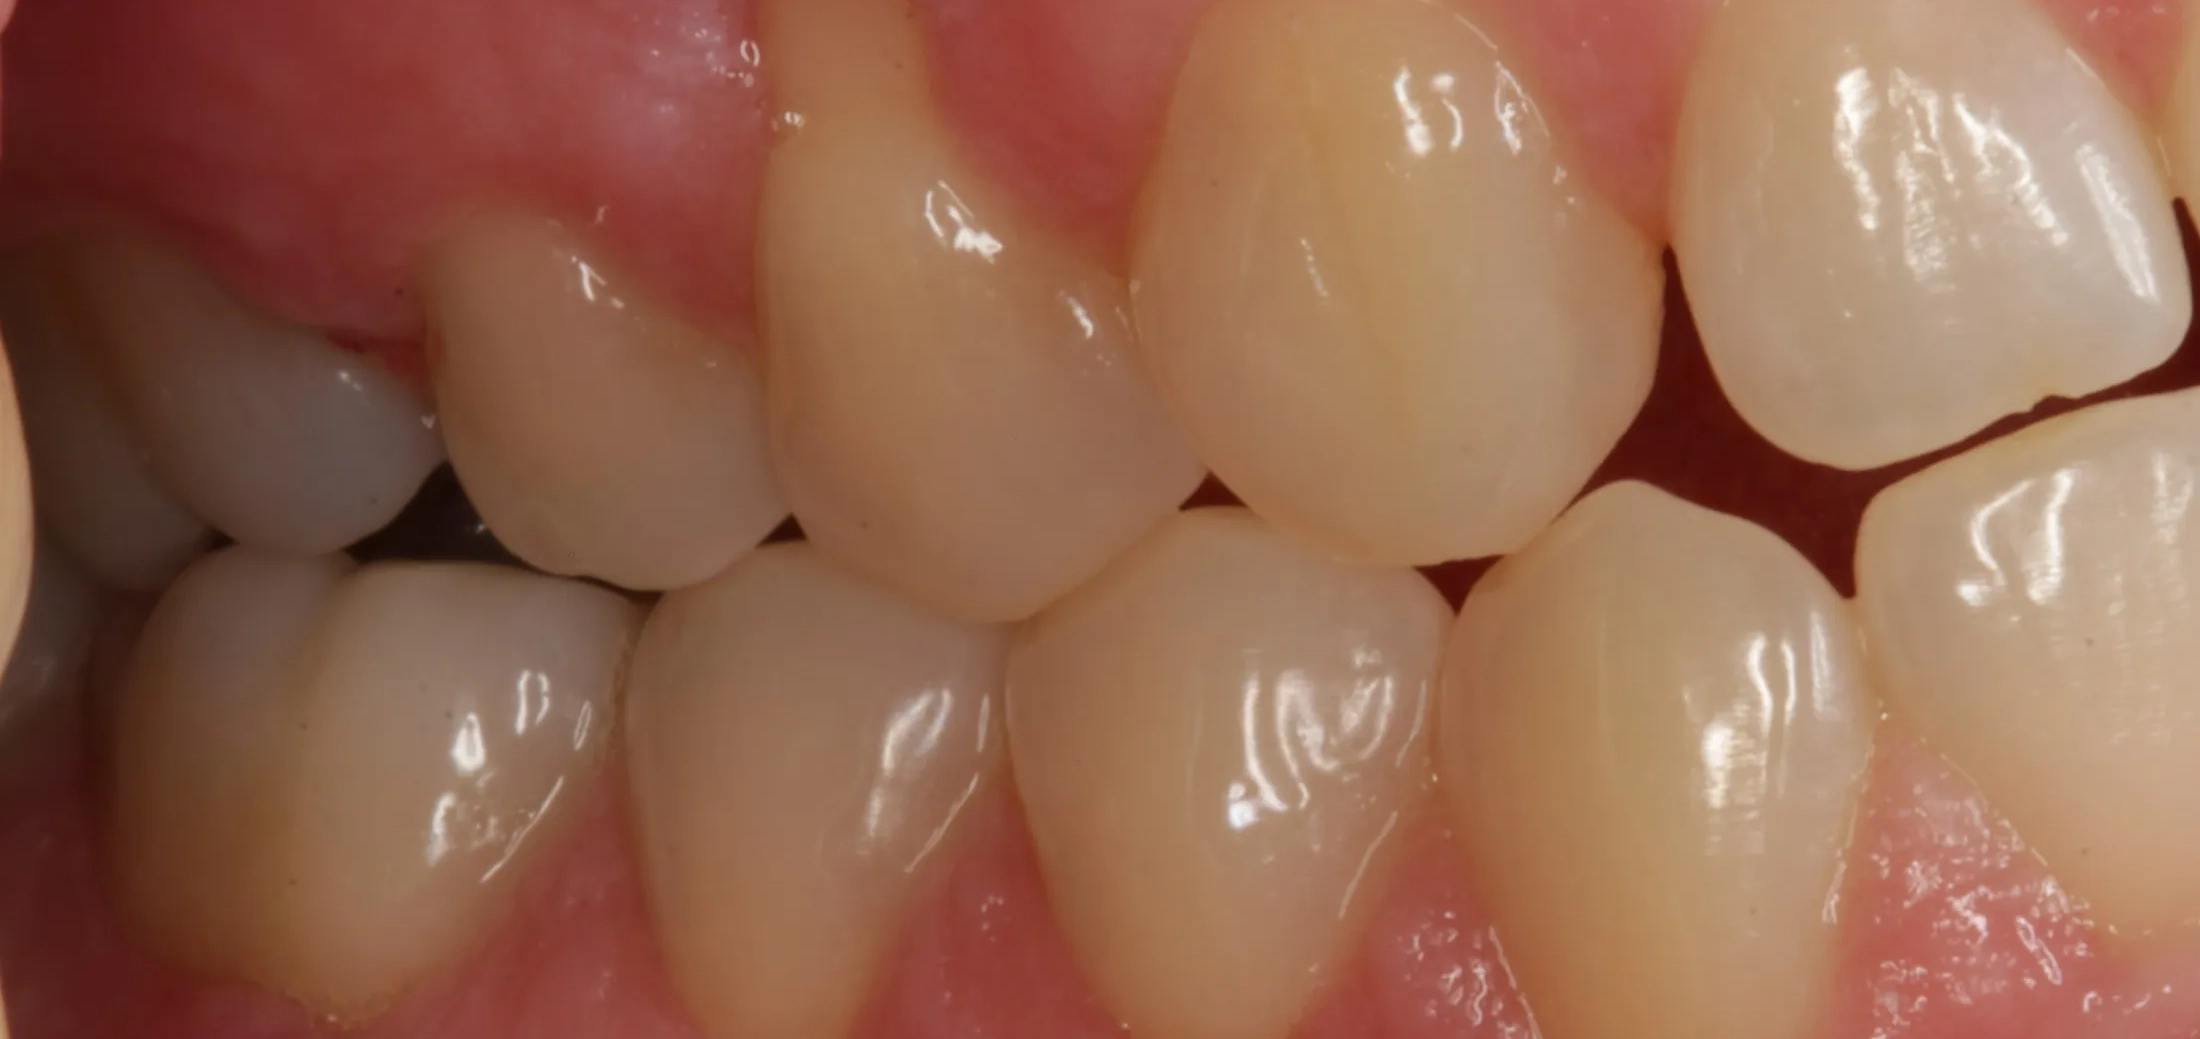 Detailed pre-treatment view of gums set for grafting surgery.